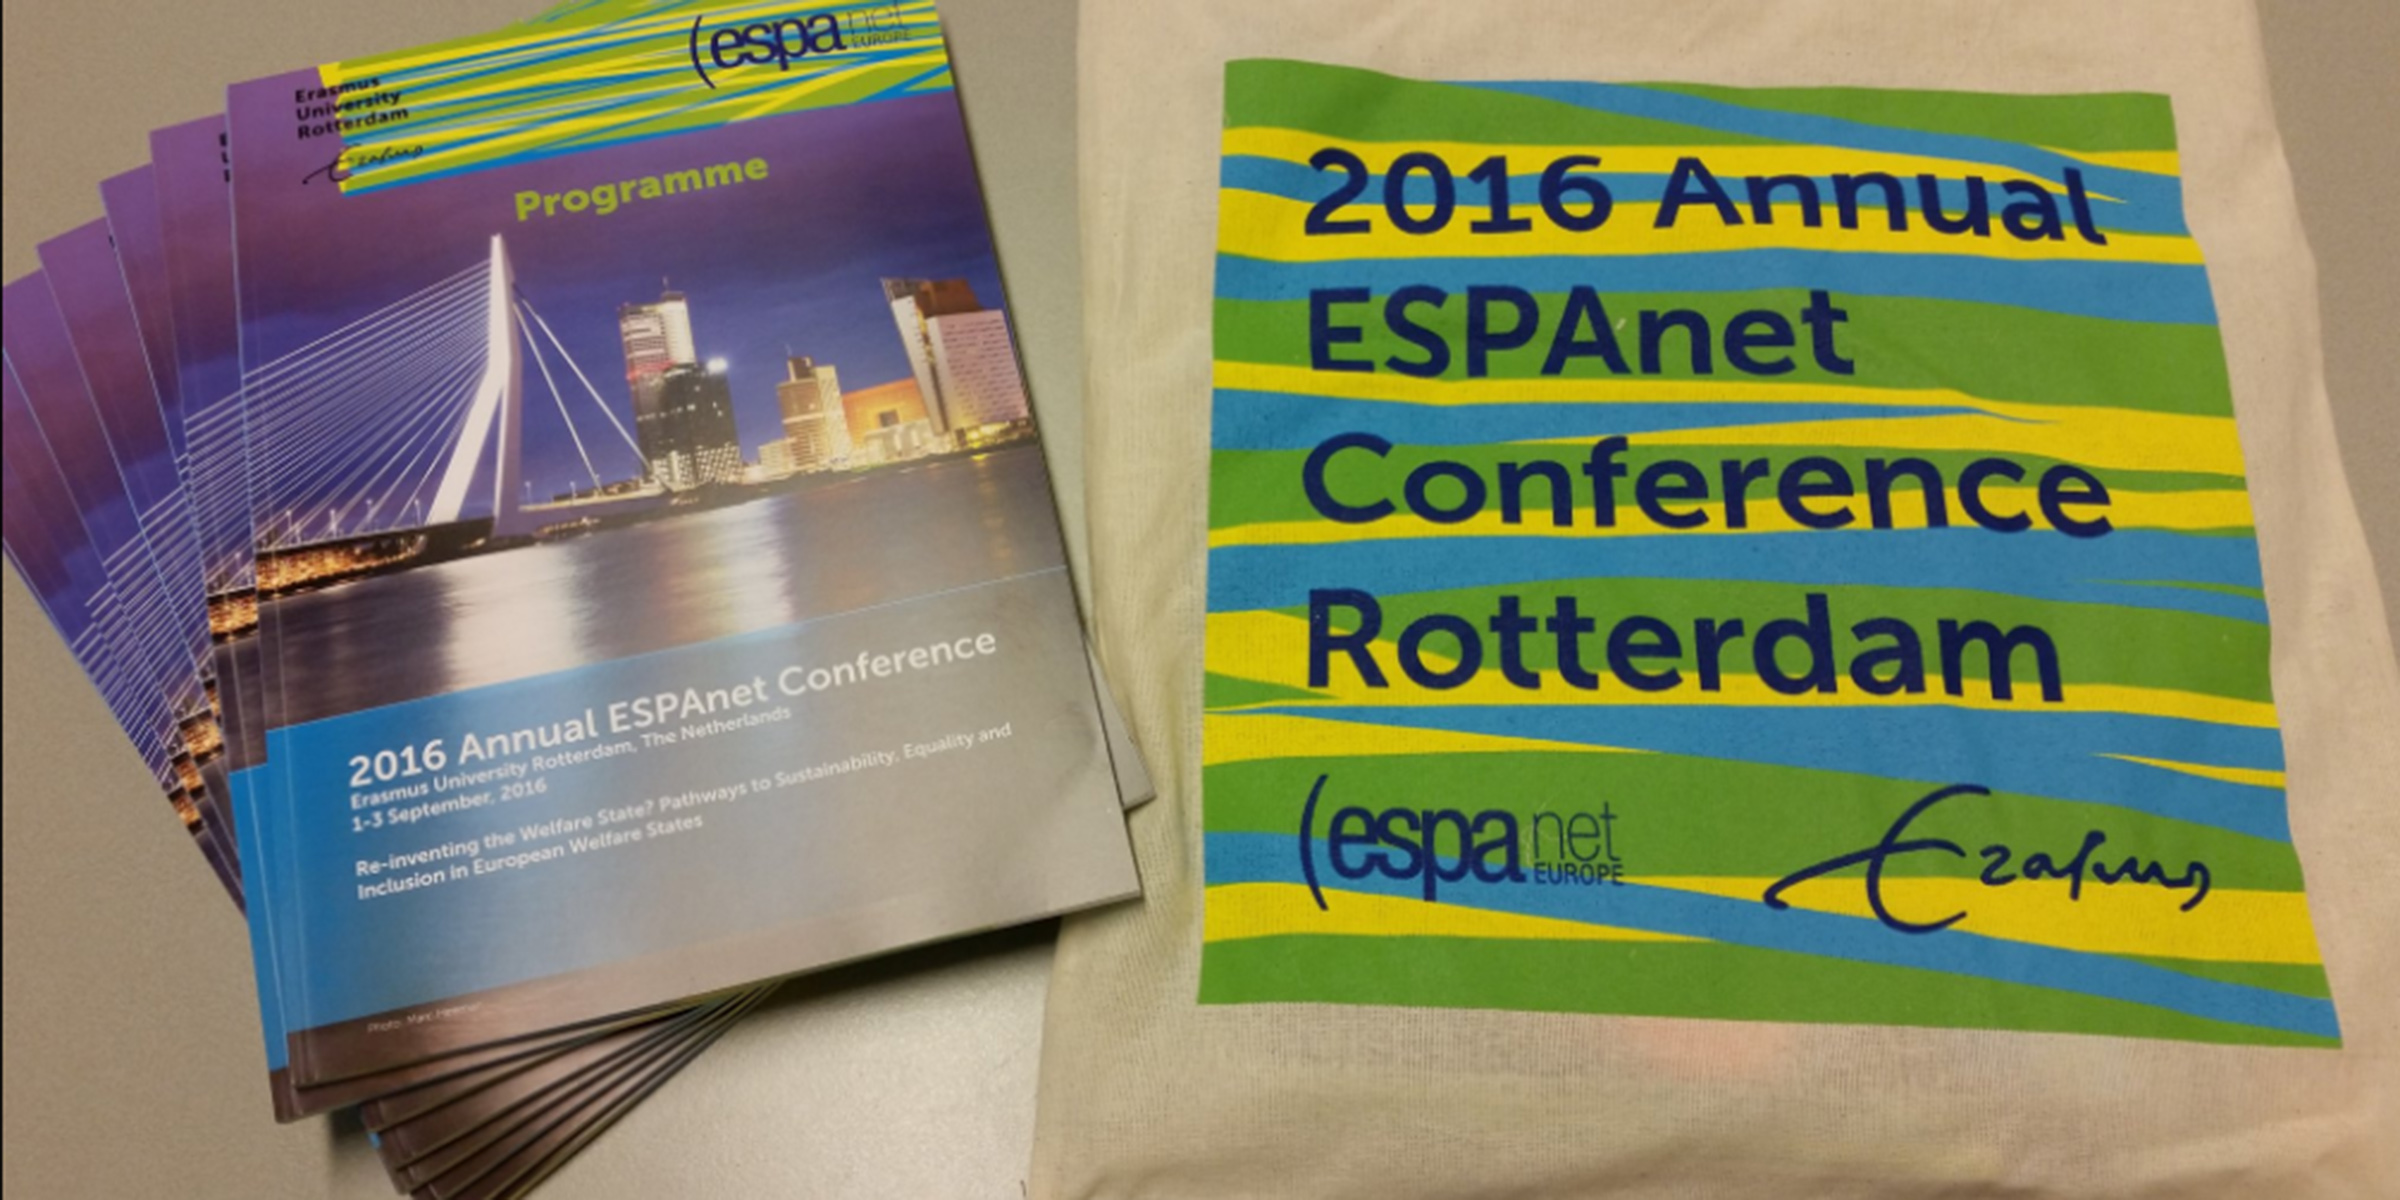 A picture of the ESPAnet conference pamphlet